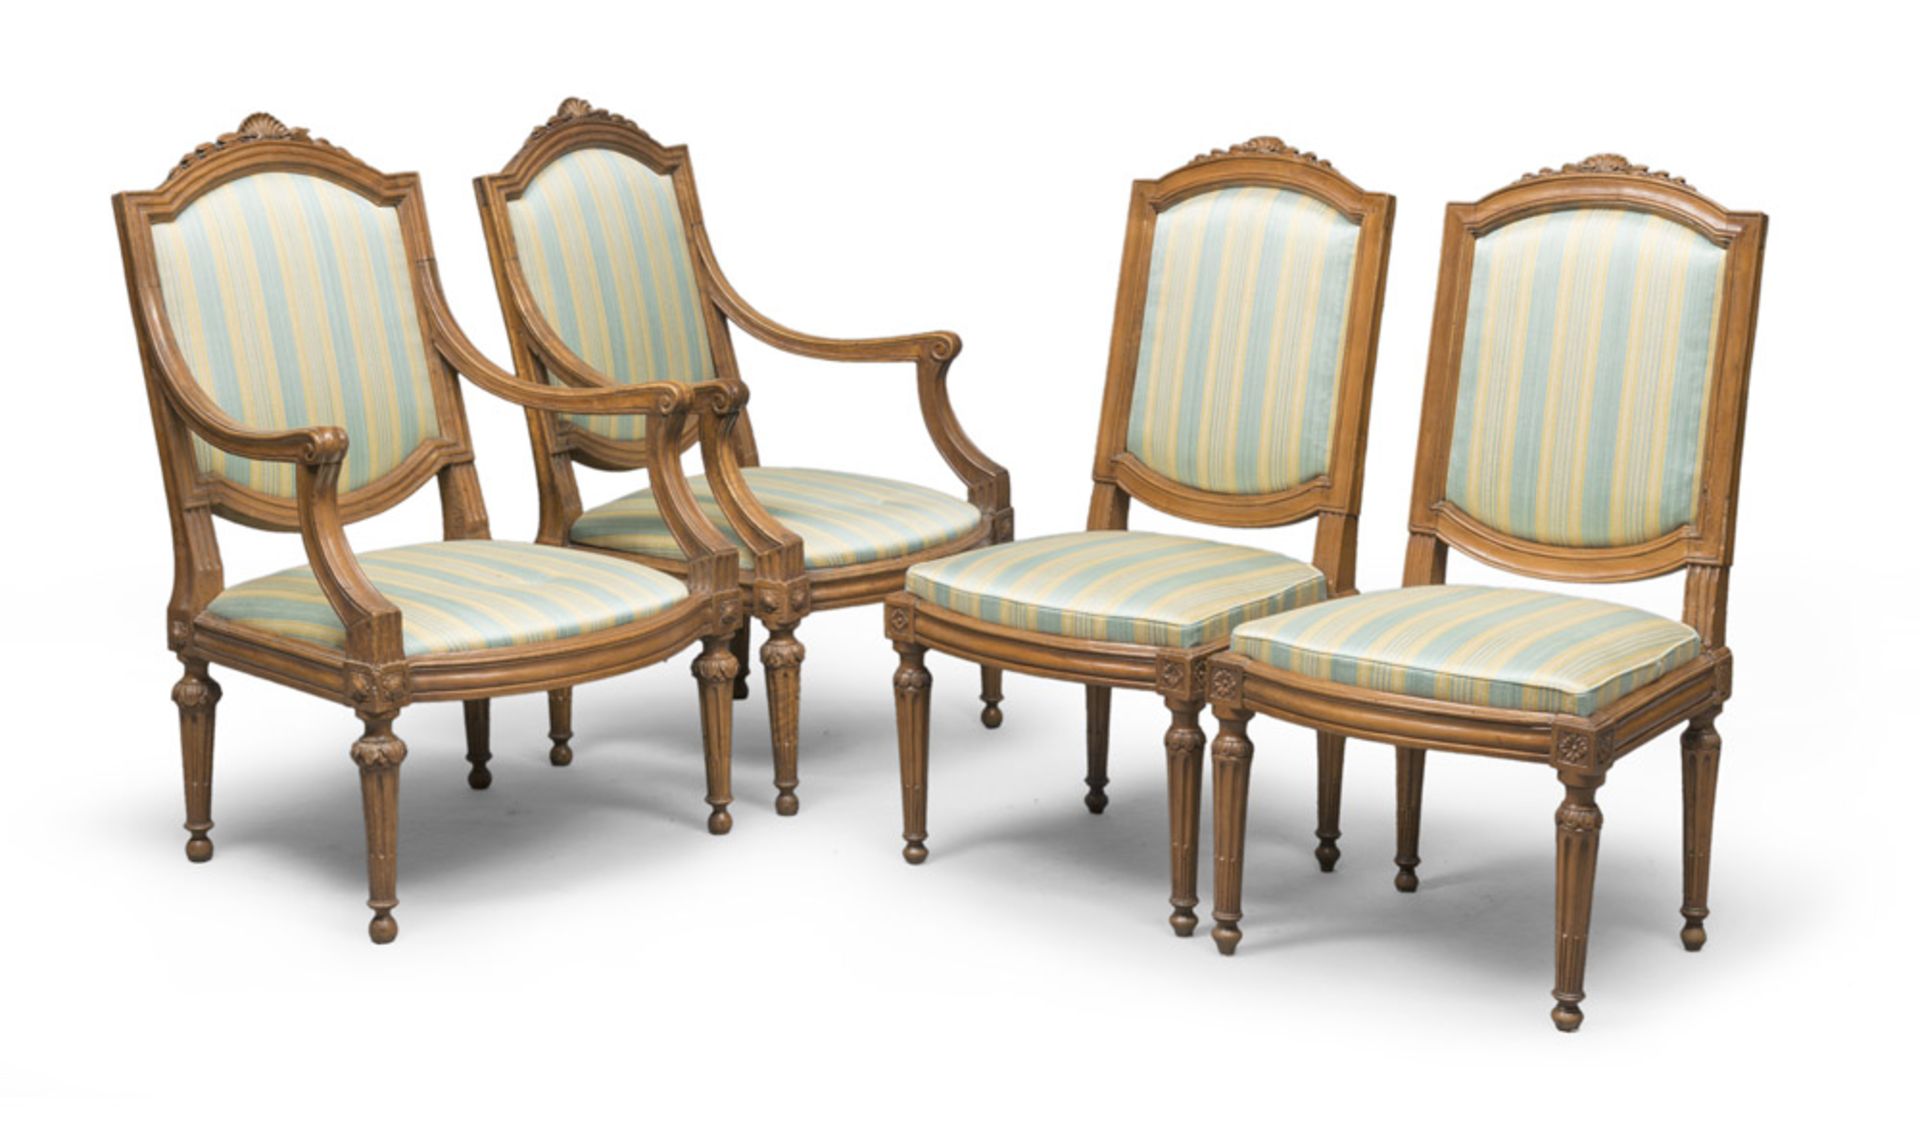 Set of a pair of clear walnut-tree armchairs and two chairs, late of period of Louis XVI. Measures